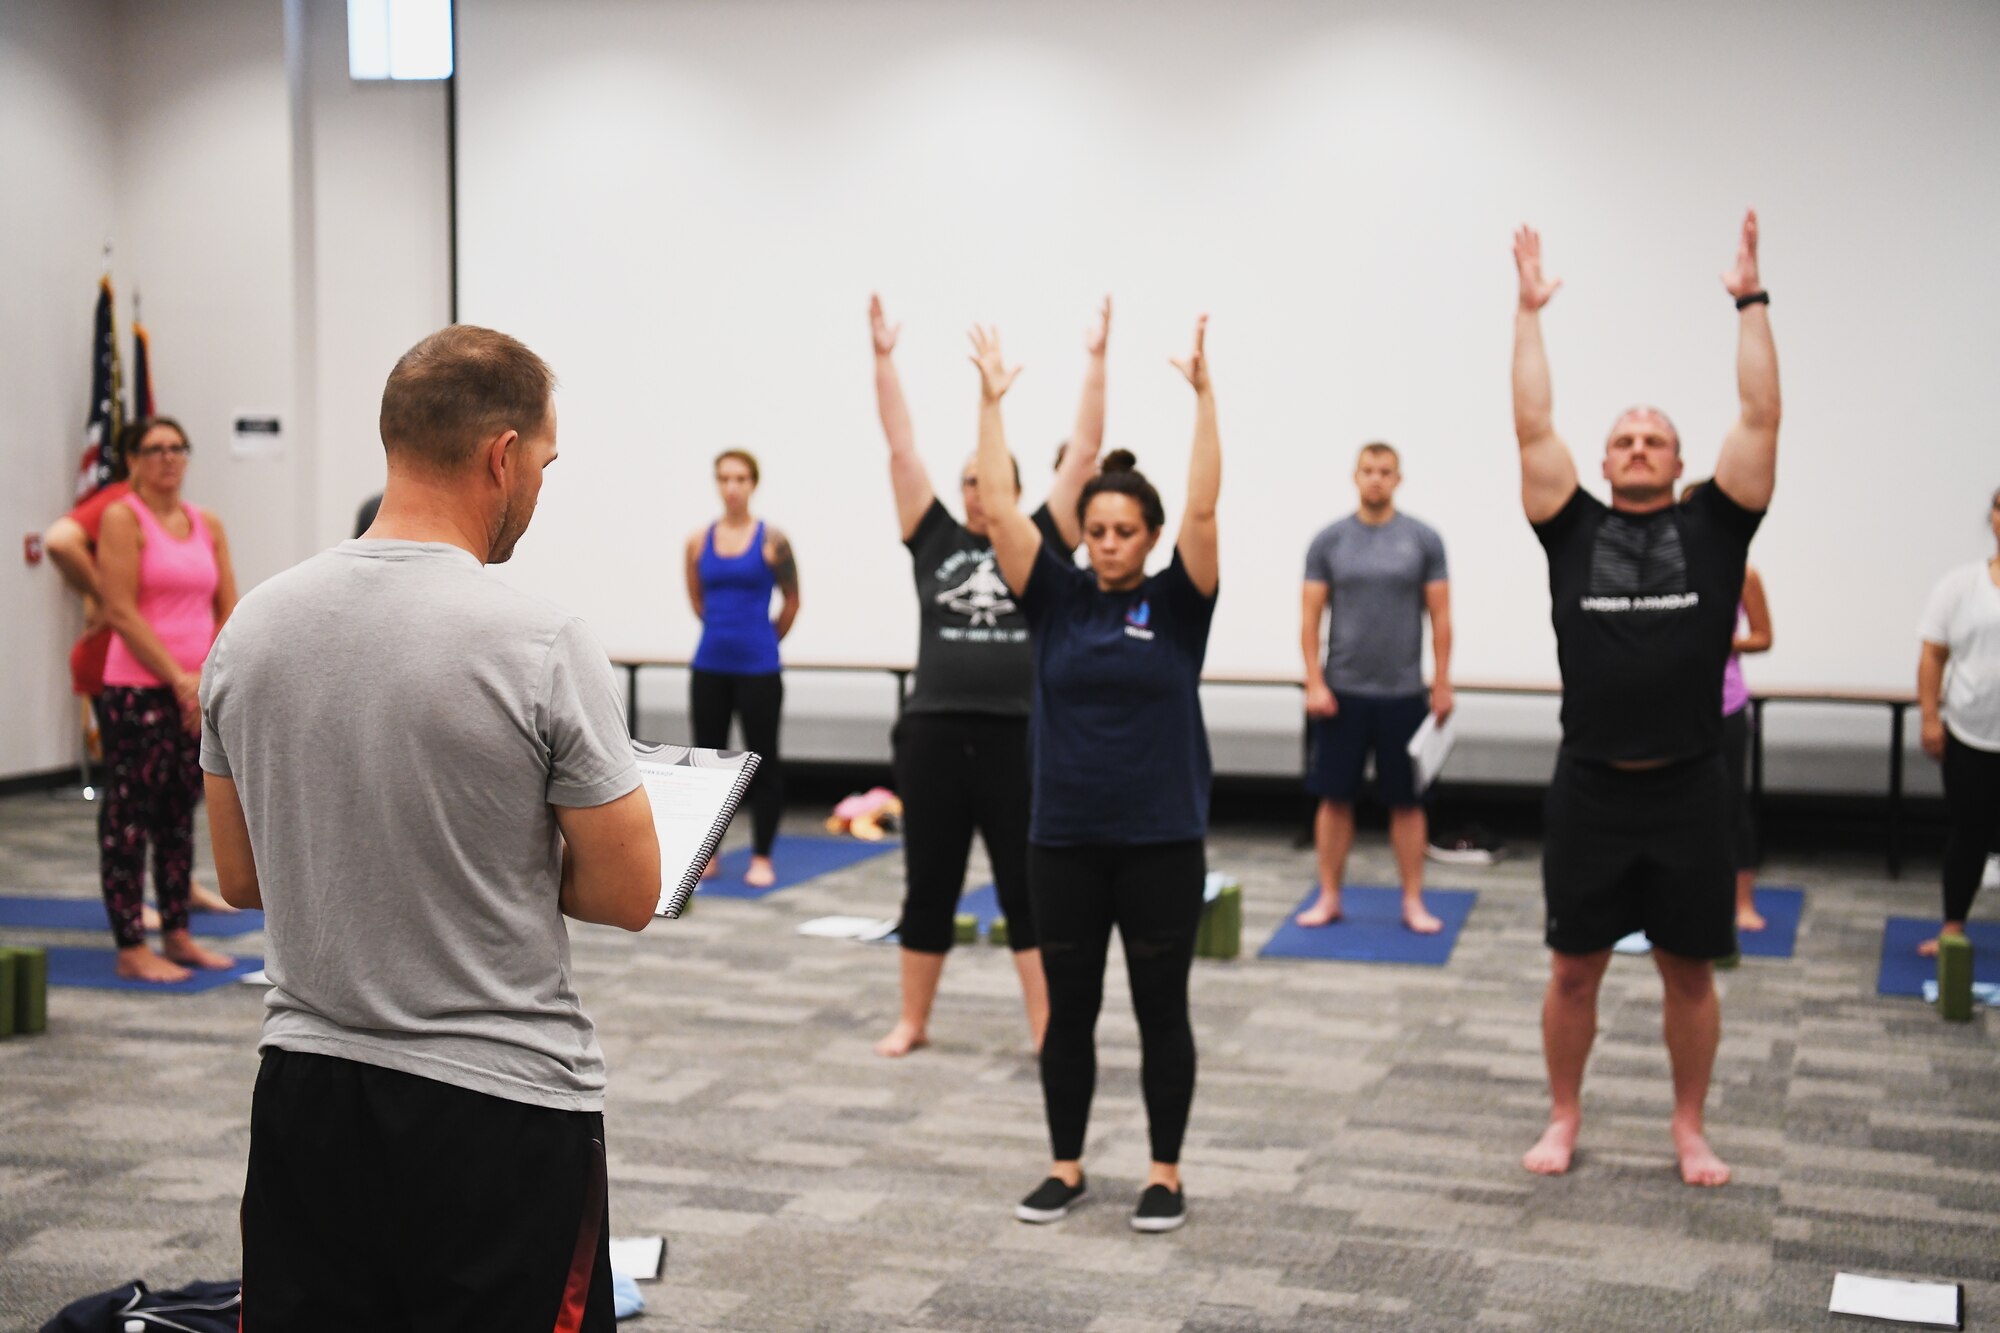 An Airman practices leading a yoga class July 18, 2022 at the 178th Wing in Springfield, Ohio. The training is a part of a pilot program called Yoga Shield, which aims to teach Airmen to reduce stress and to build mental and physical resiliency through yoga. (U.S. Air National Guard photo by Shane Hughes)